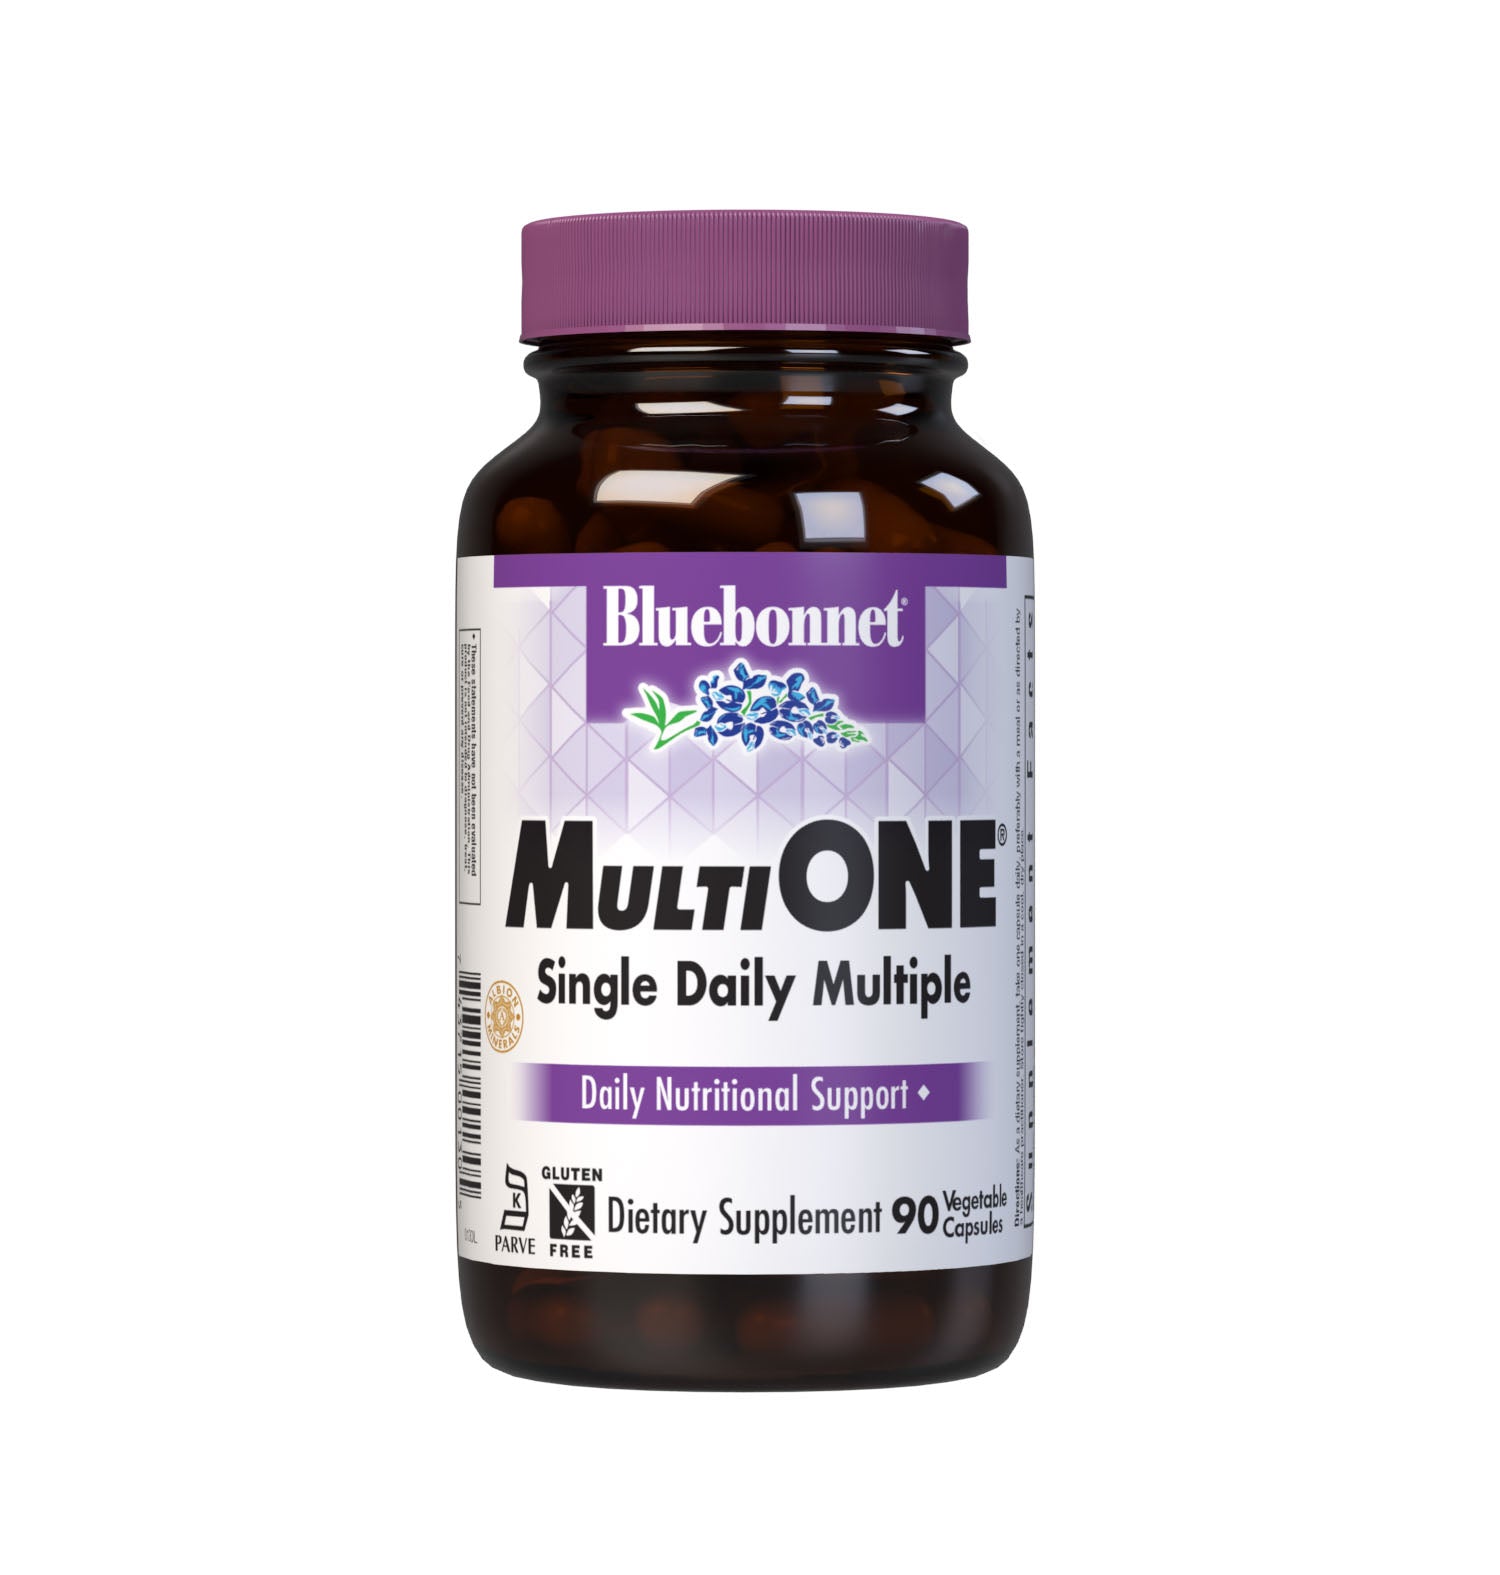 Bluebonnet’s Multi One Formula 90 Vegetable Capsules is a single daily multivitamin and multimineral dietary supplement in an easy-to-swallow, two-piece vegetable capsule and is formulated with highly efficient, patented Albion chelated minerals and popular carotenoids, such as beta carotene and FloraGLO lutein from marigold extract. #size_90 count